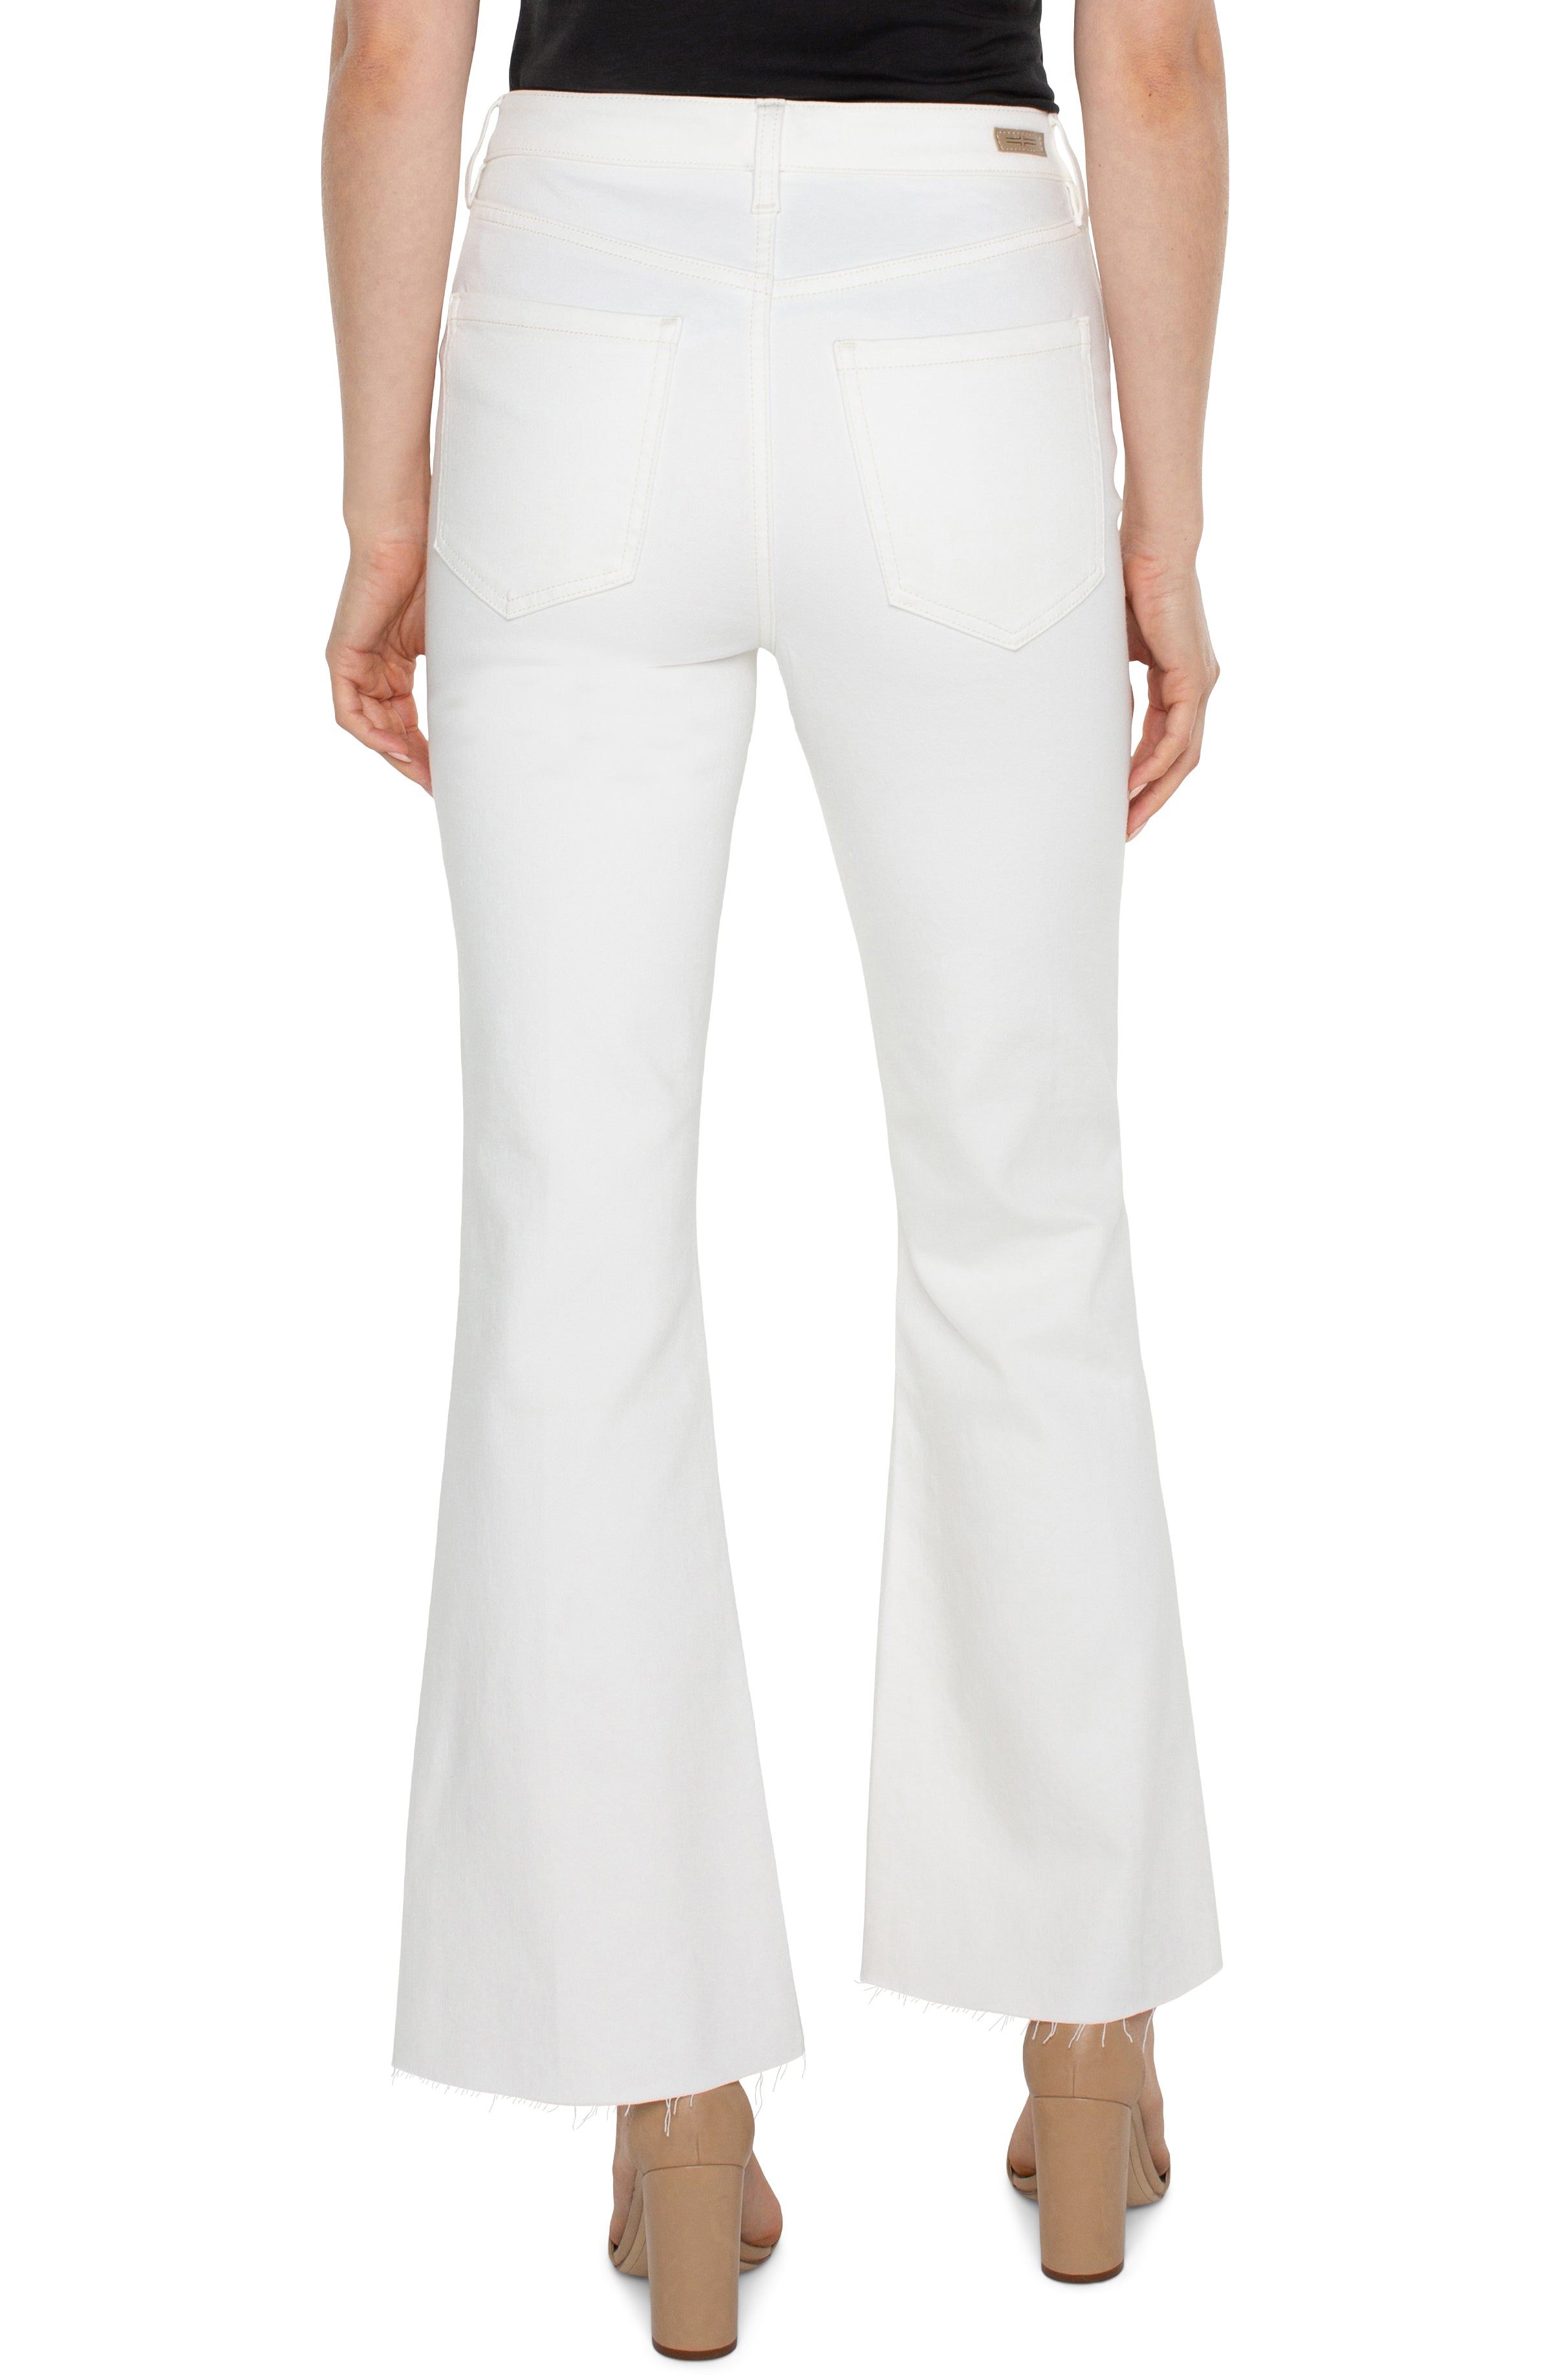 Liverpool Hannah Hi-Rise Flare with Slit - Bone White Back View